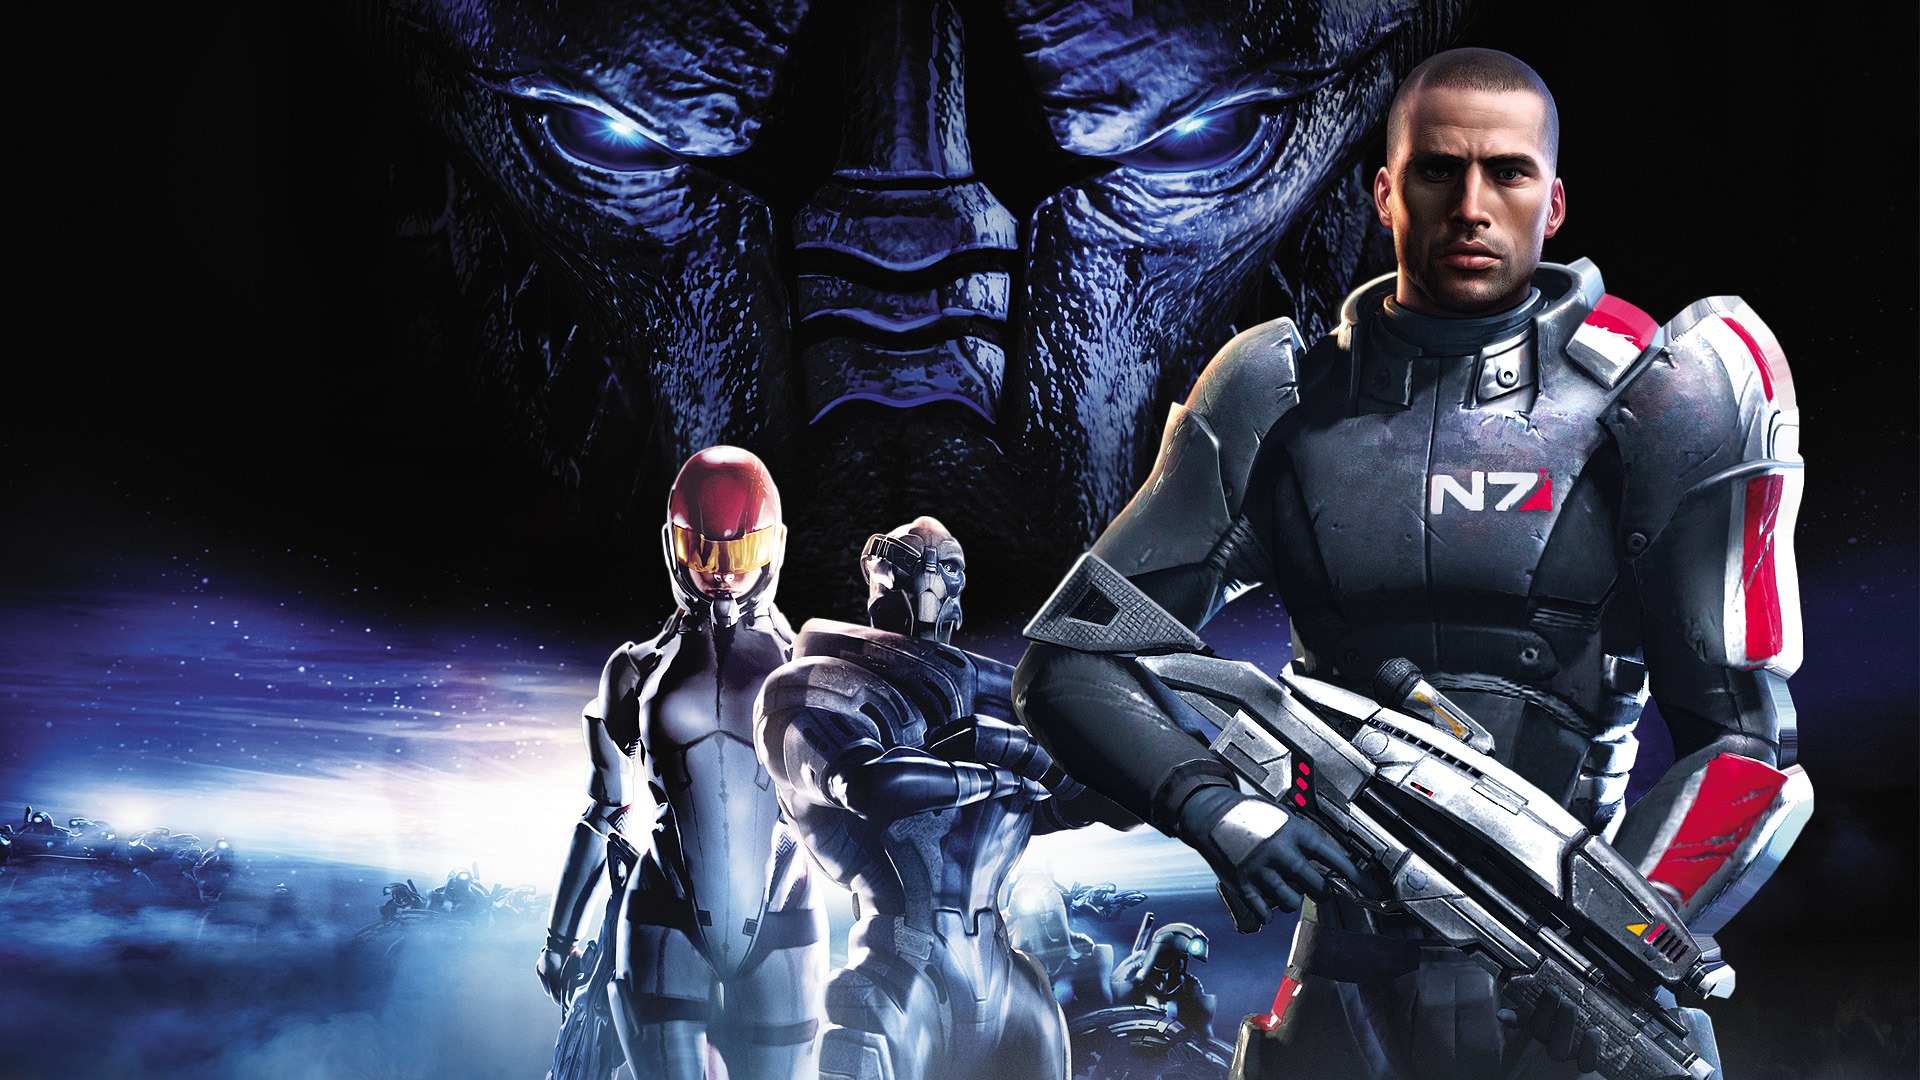 download the new for windows Mass Effect